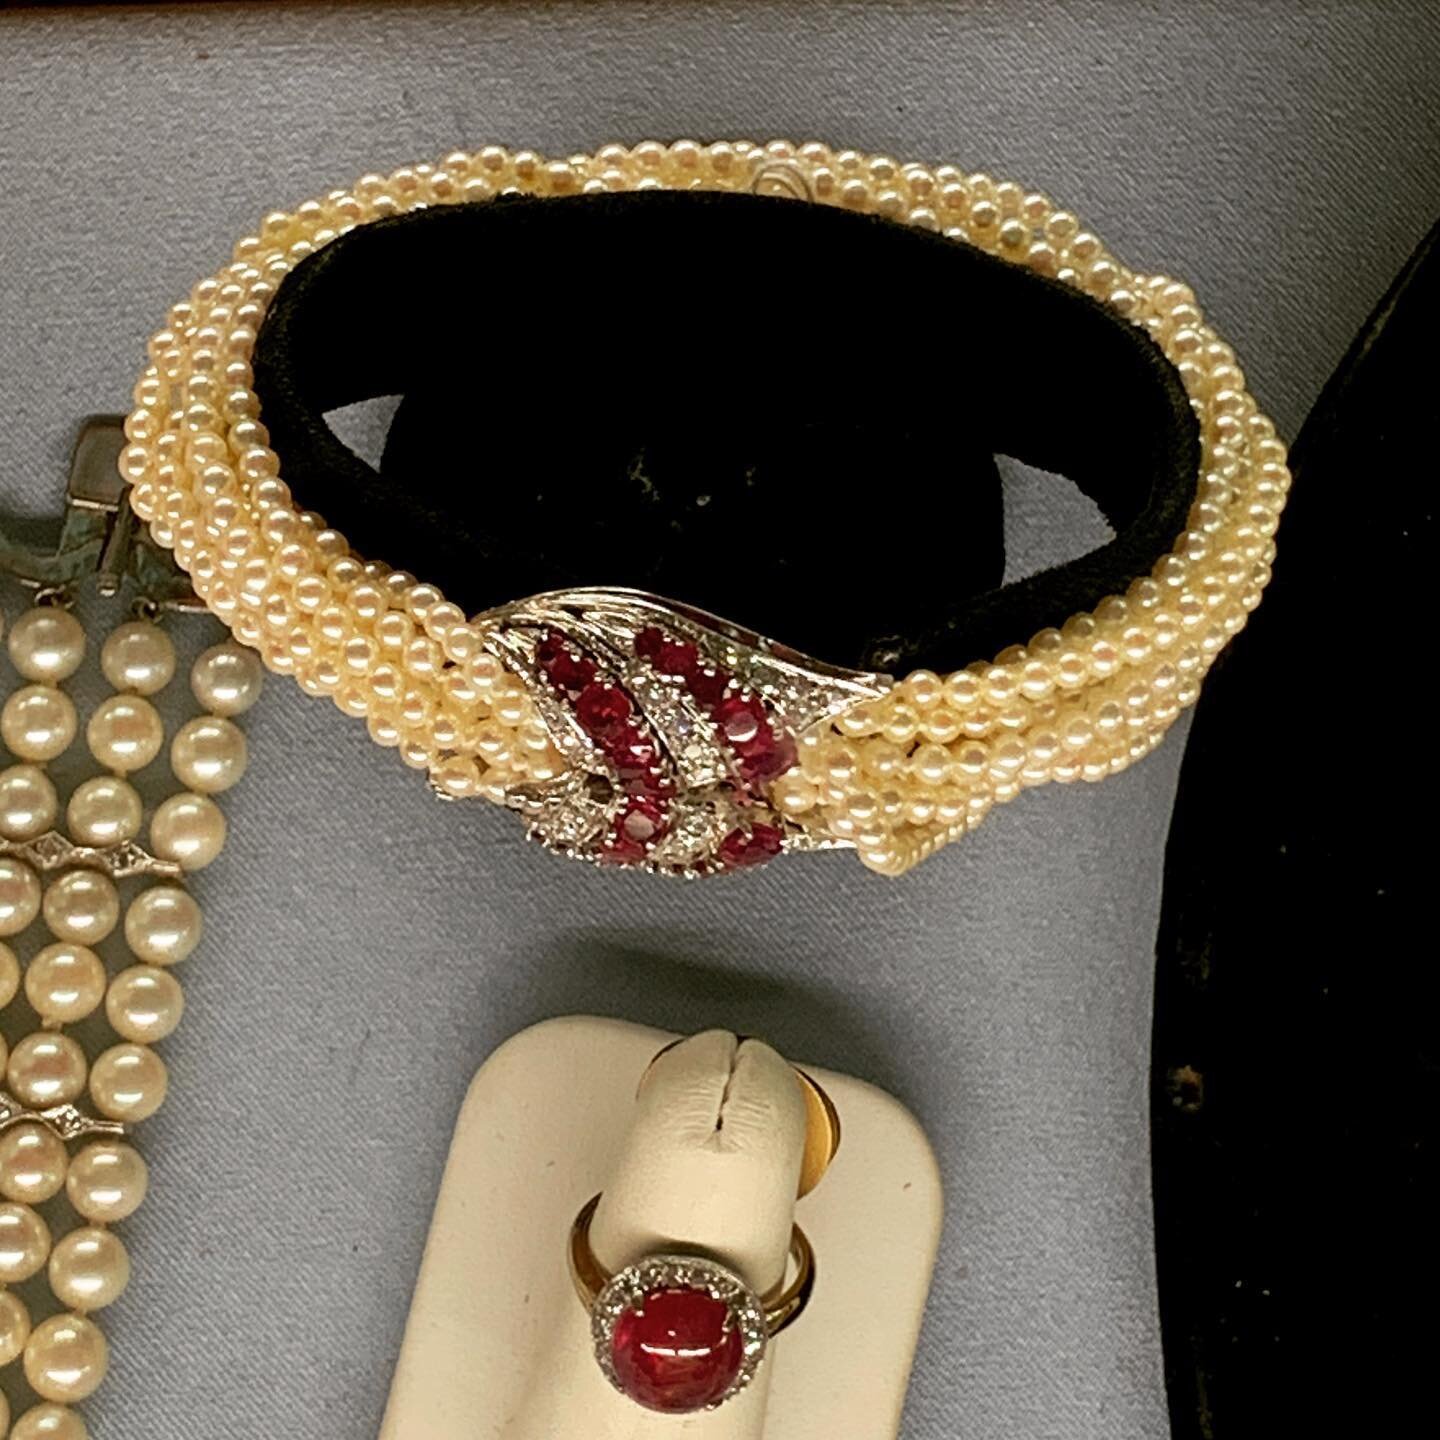 What special power does this bracelet give its wearer? What happens if the ring is separated from the bracelet?

Vintage pearl, diamond, and garnet bracelet found at W.M. Schwind Antiques in Yarmouth, Maine. 

#thestorytellerya #yafiction #historical